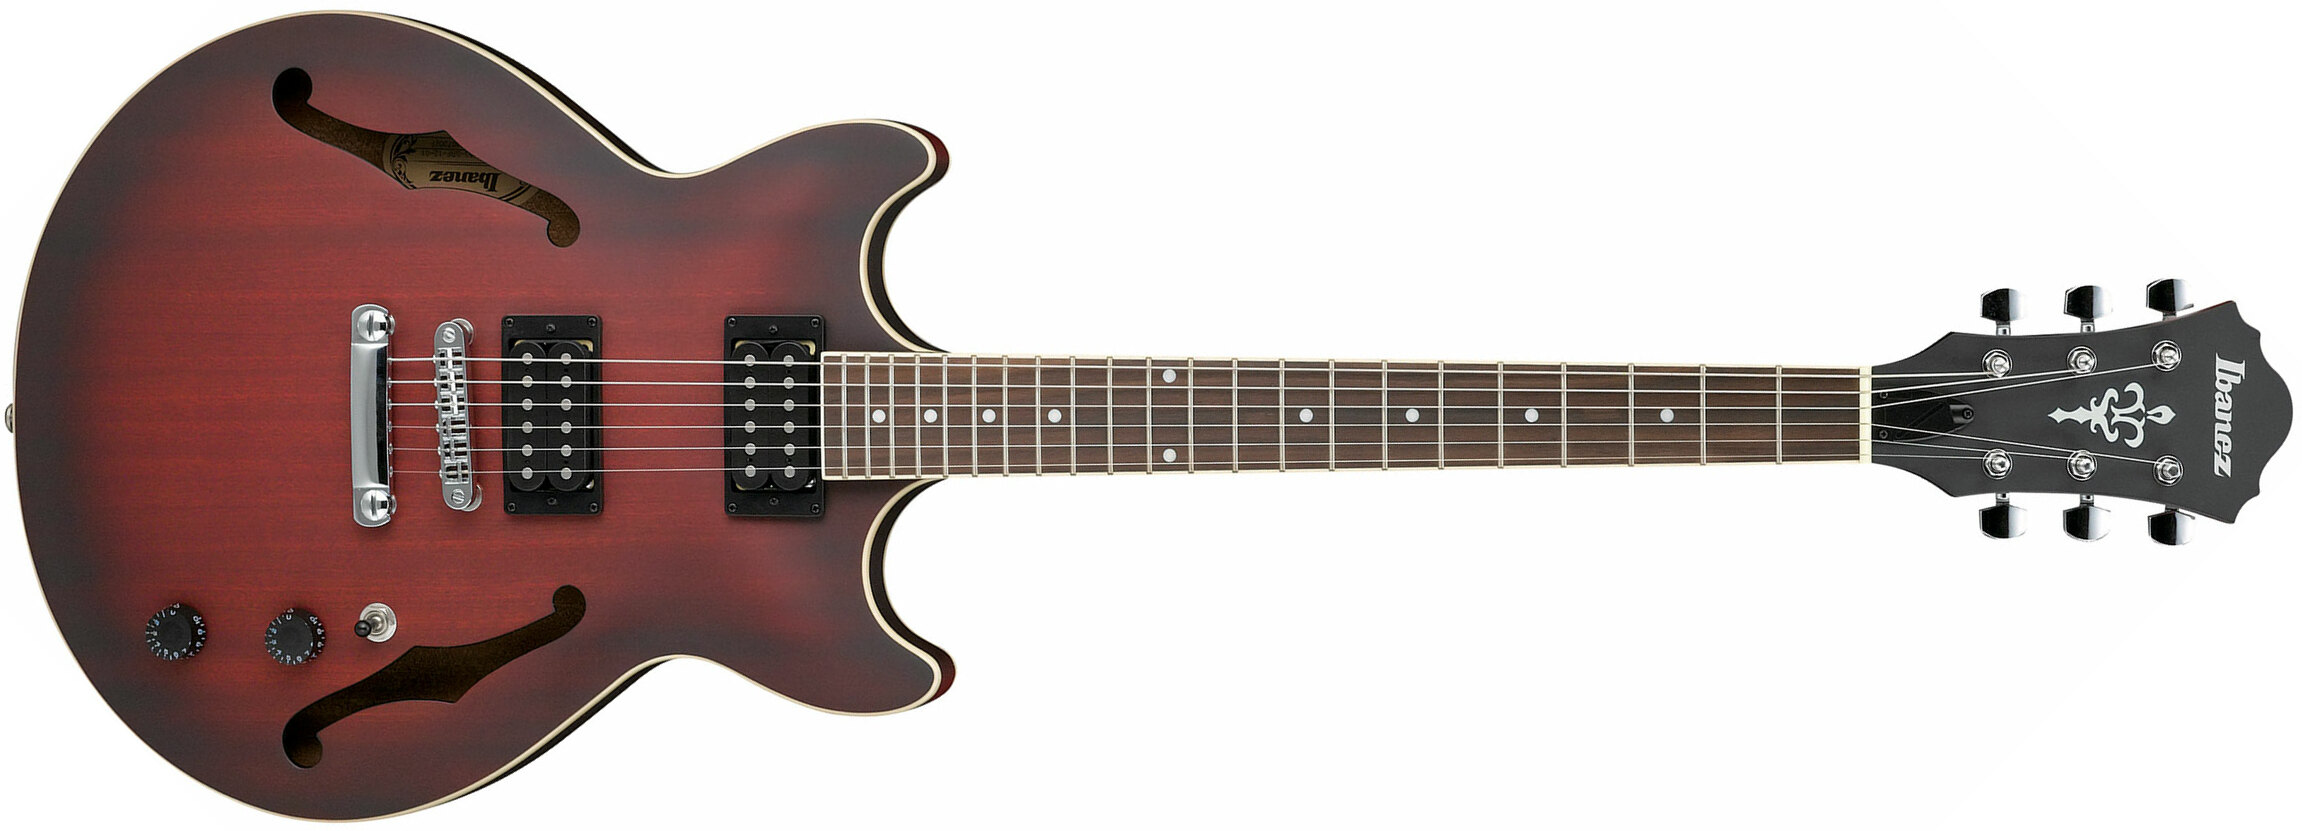 Ibanez Am53 Srf Artcore Hh Ht Wal - Sunburst Red Flat - Semi-hollow electric guitar - Main picture